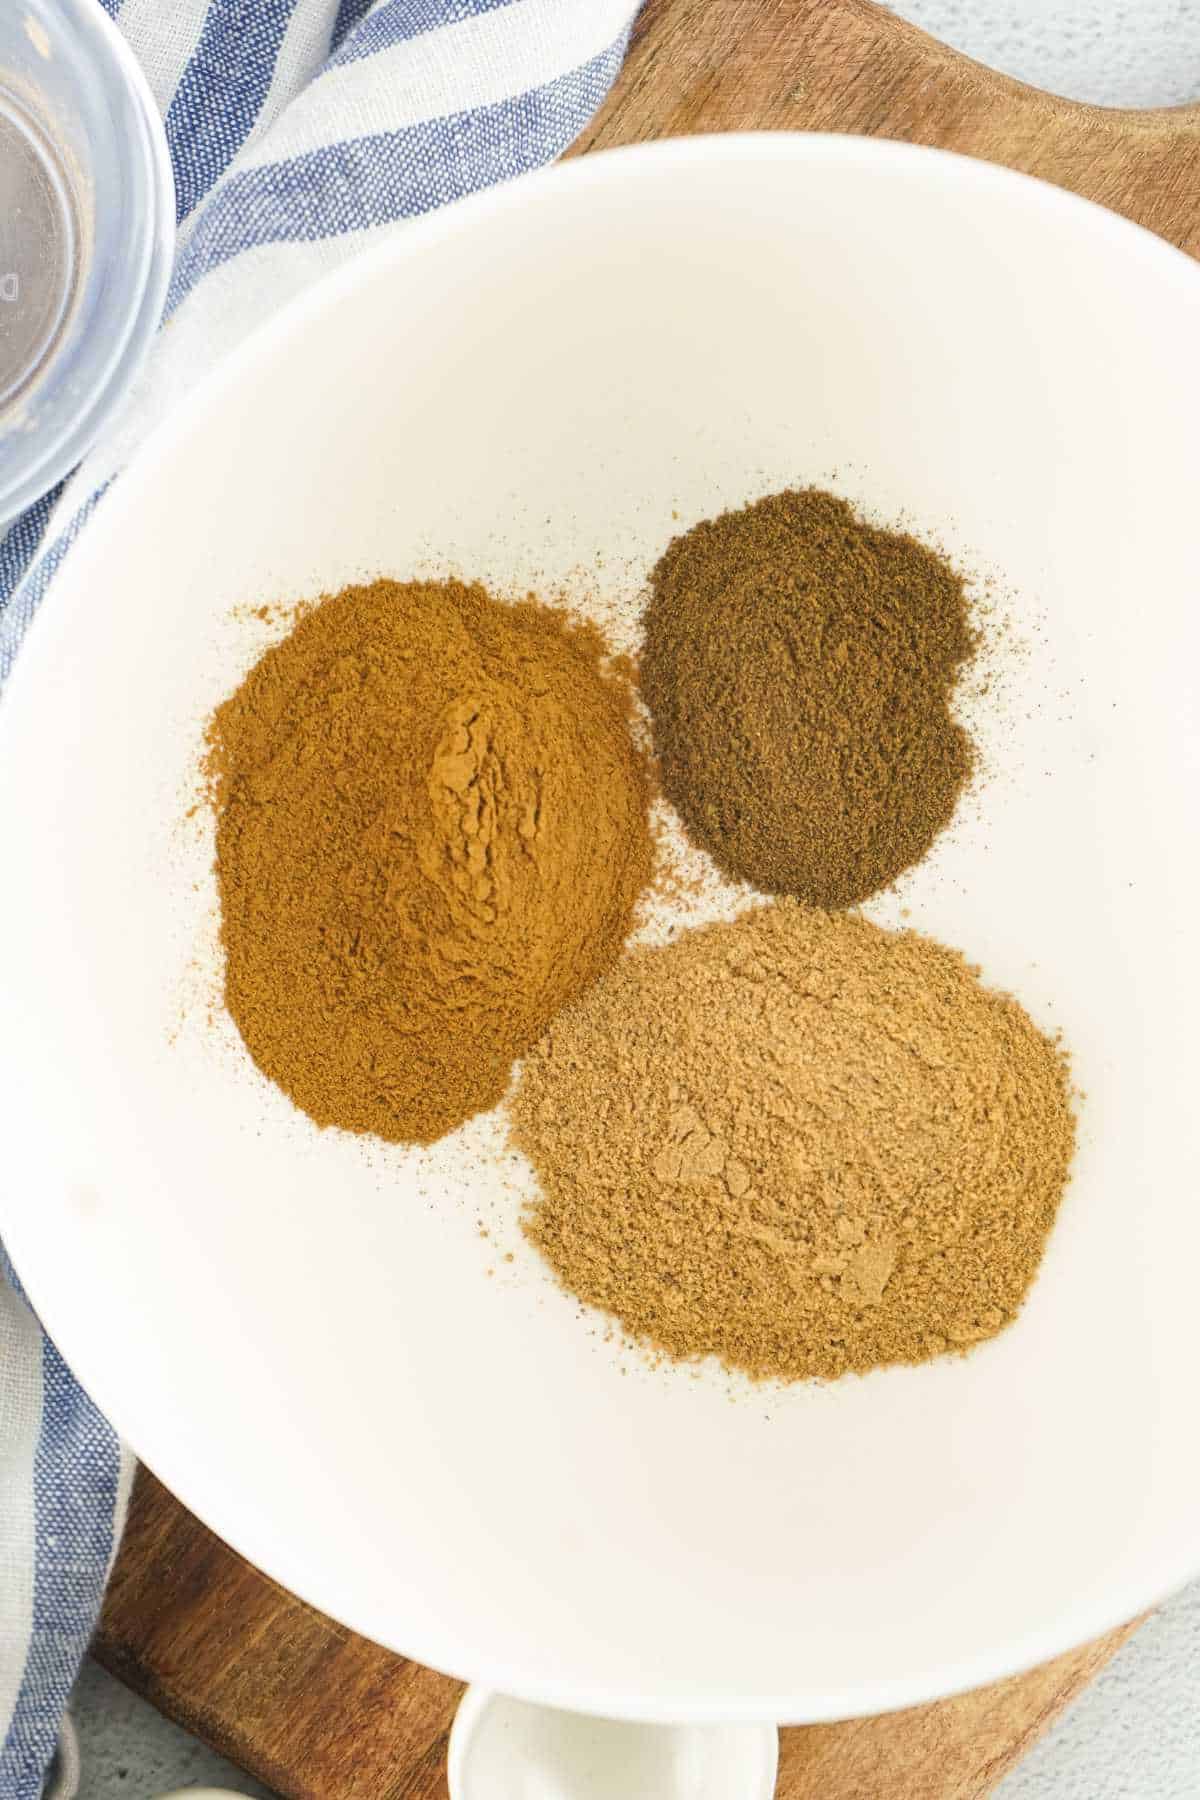 three spice piles in a white bowl.